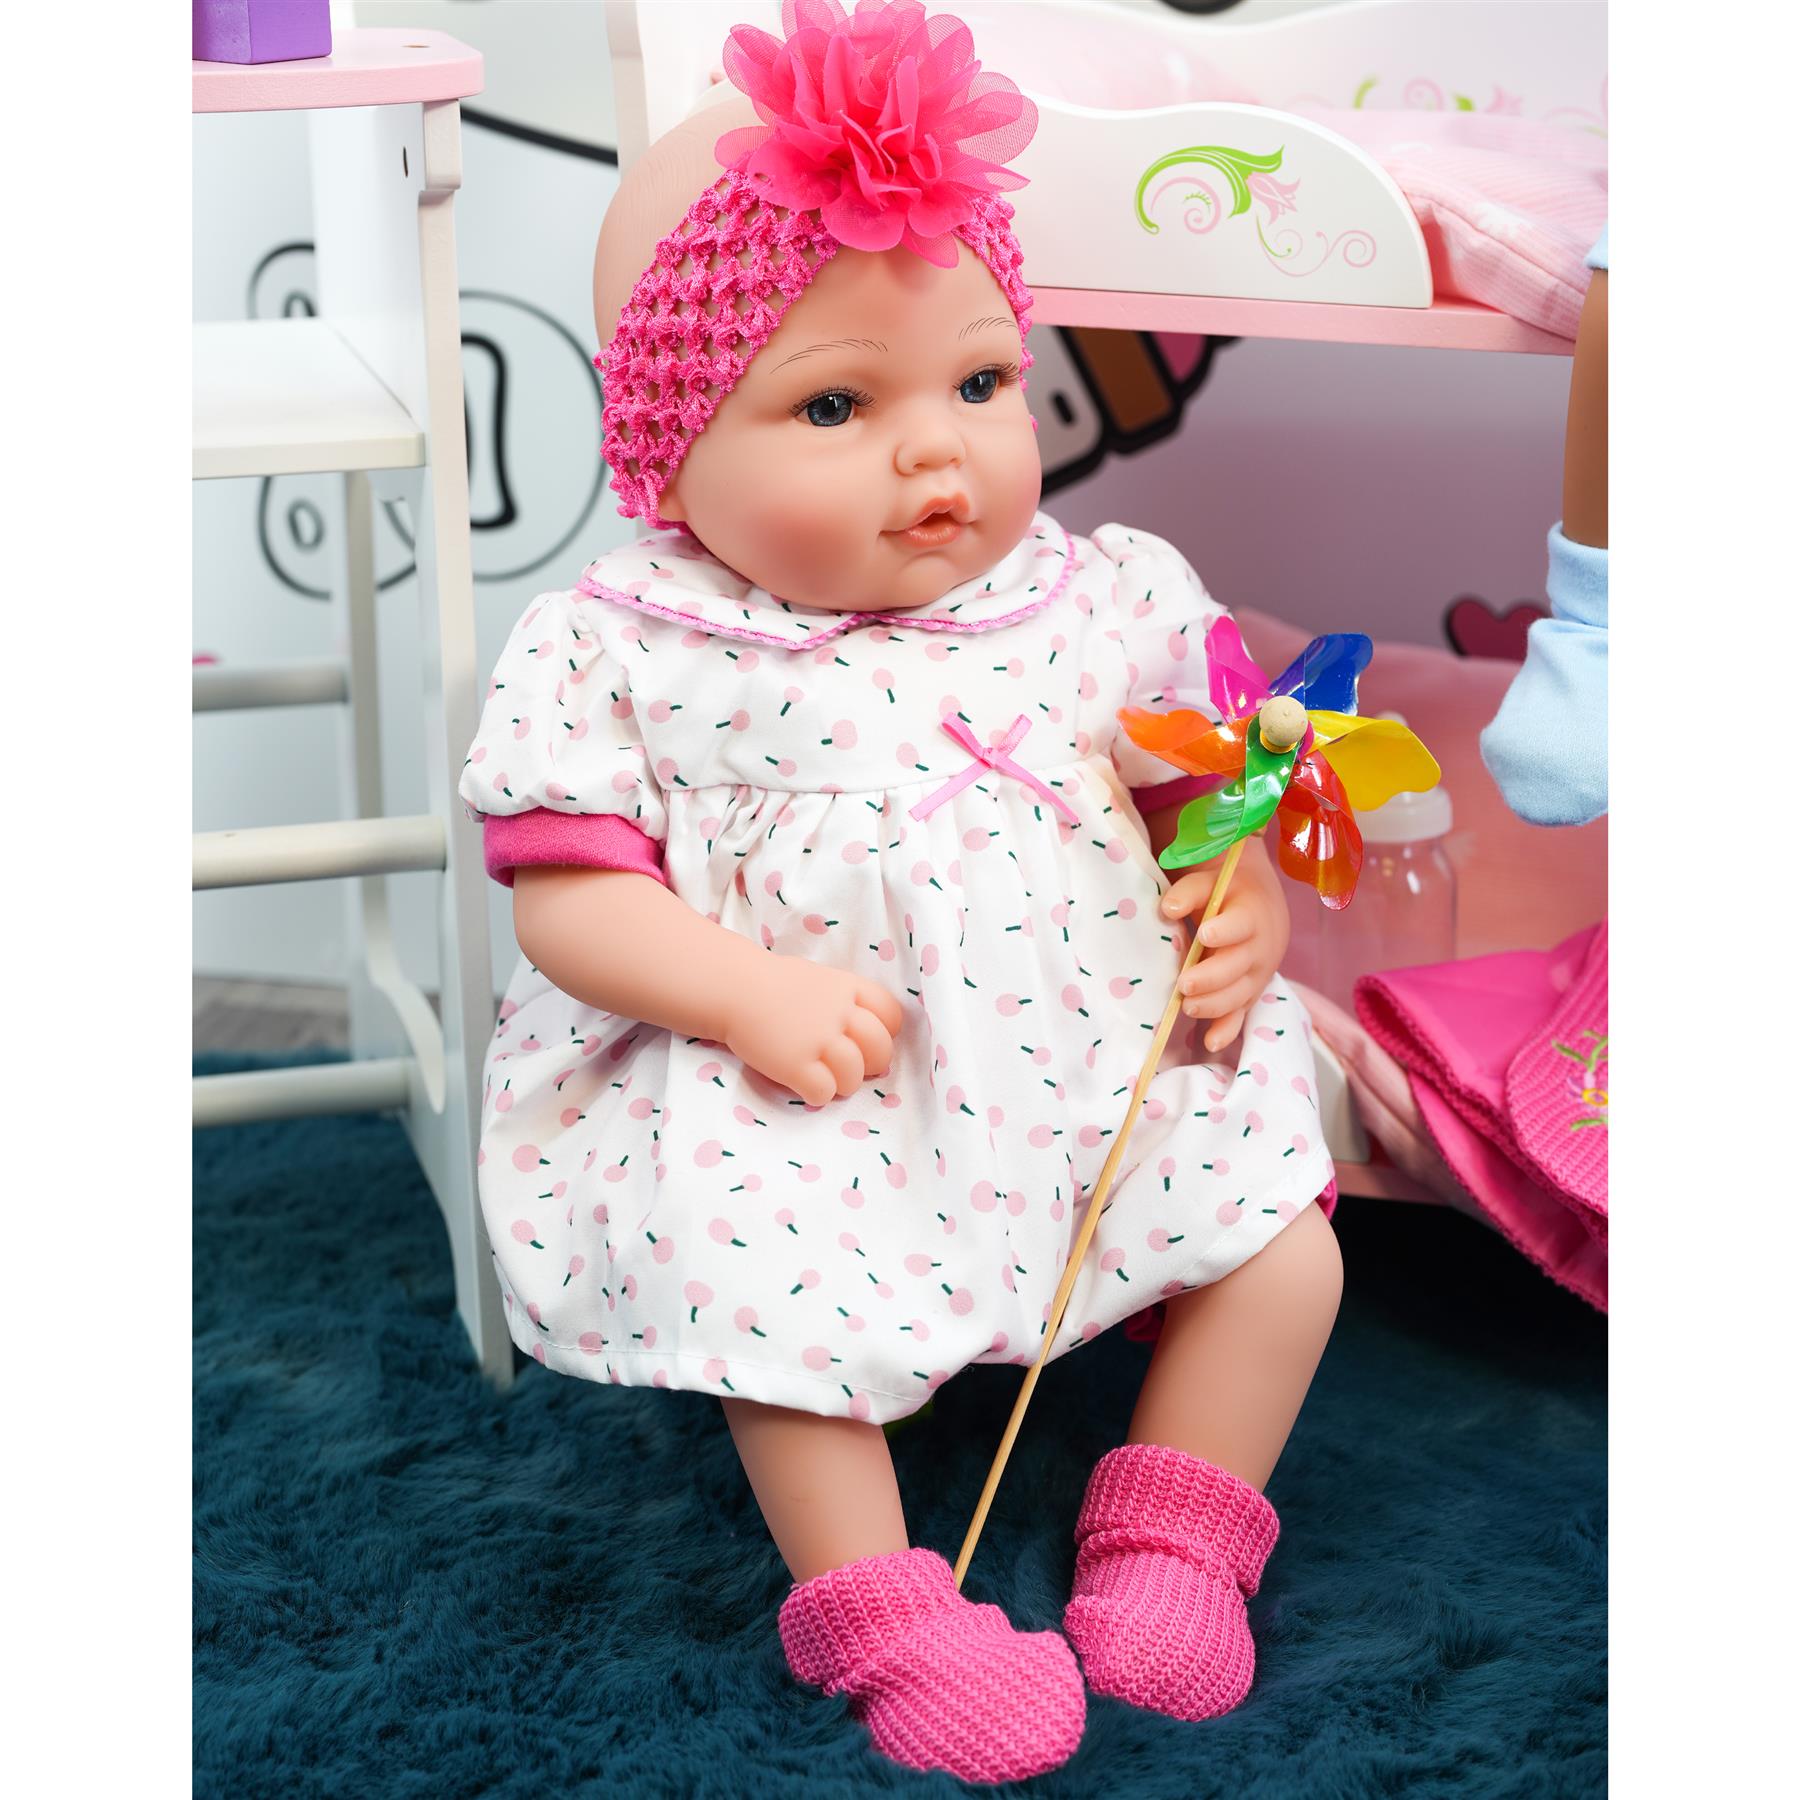 BiBi Outfits - Reborn Doll Clothes (Hot Pink) (50 cm / 20